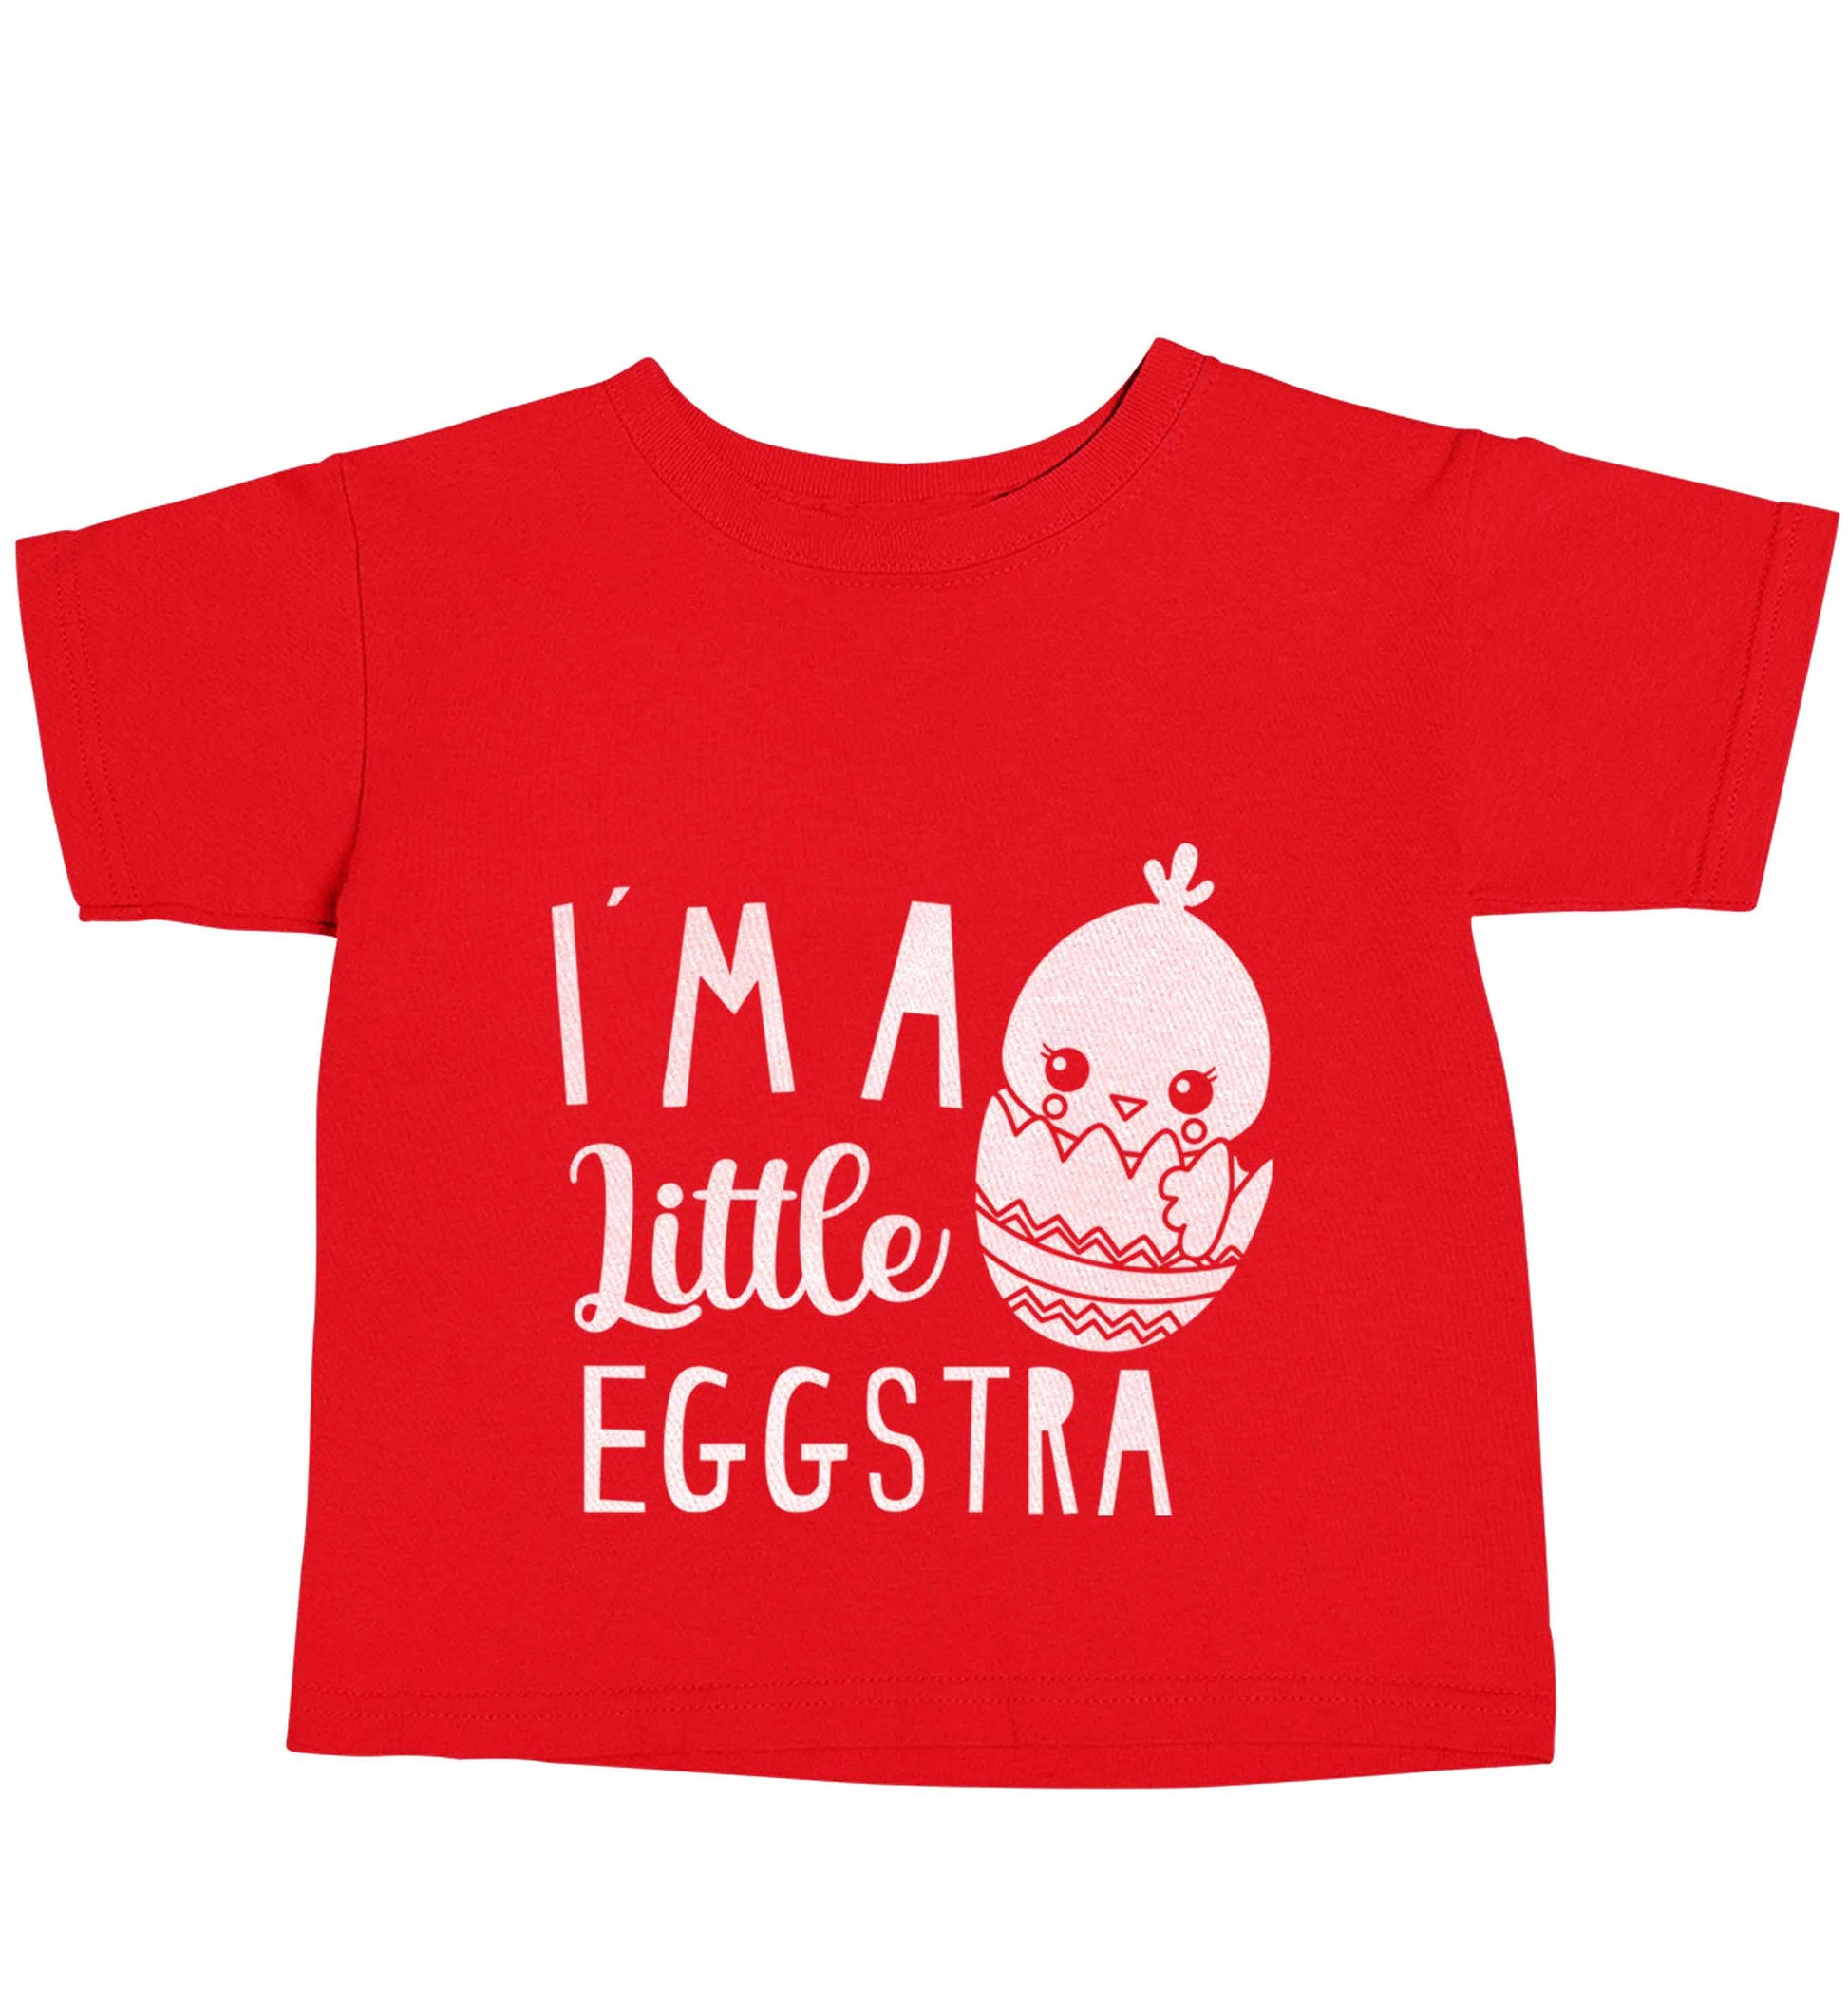 I'm a little eggstra red baby toddler Tshirt 2 Years